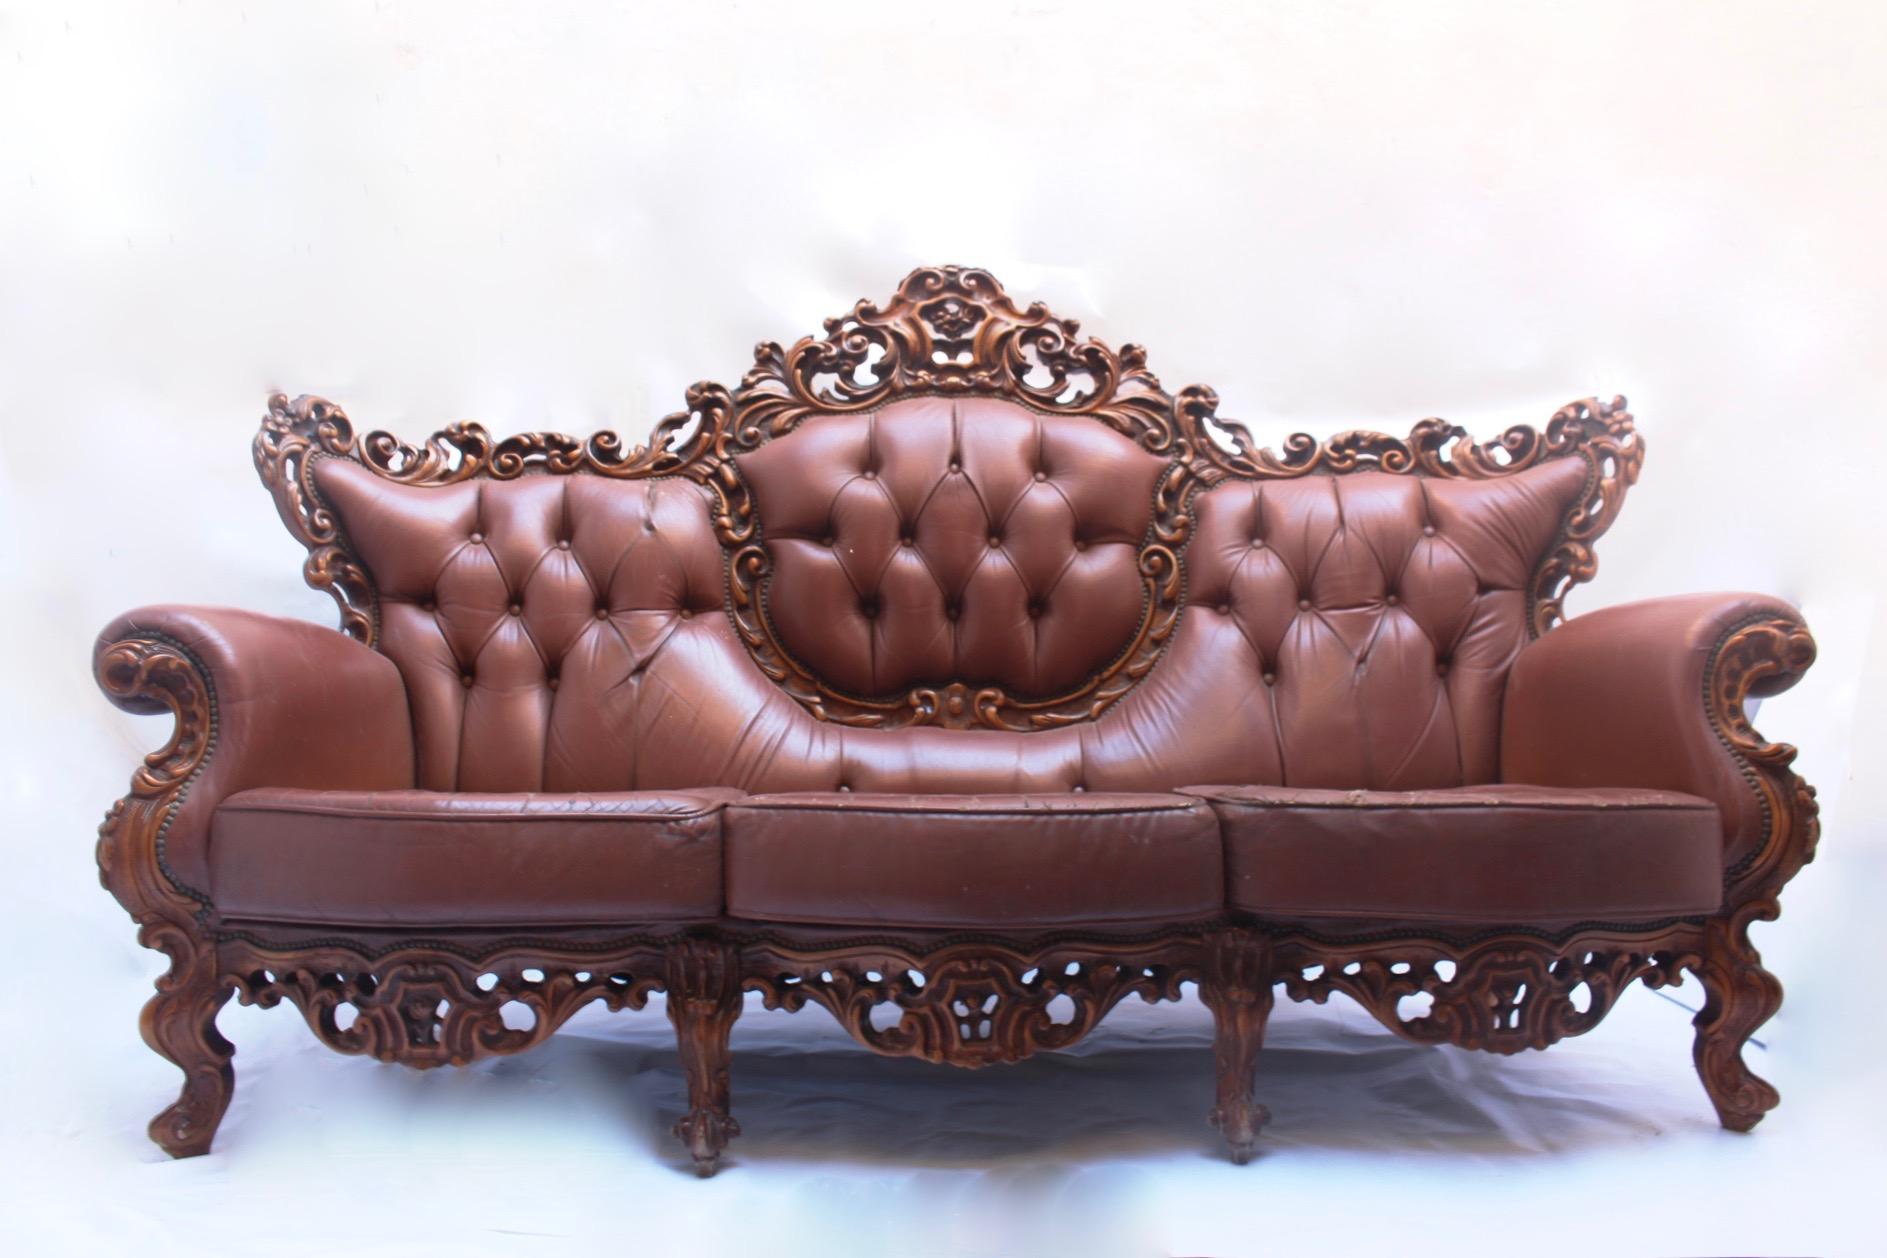 One of a kind midcentury handcrafted Louis XV Rococo/Baroque large leather Capitonné Canapé by Mariano García, Valencia, Spain, 1960s. Canapé is the French name that designates a couch or sofa but that it is not completely upholstered, and shows